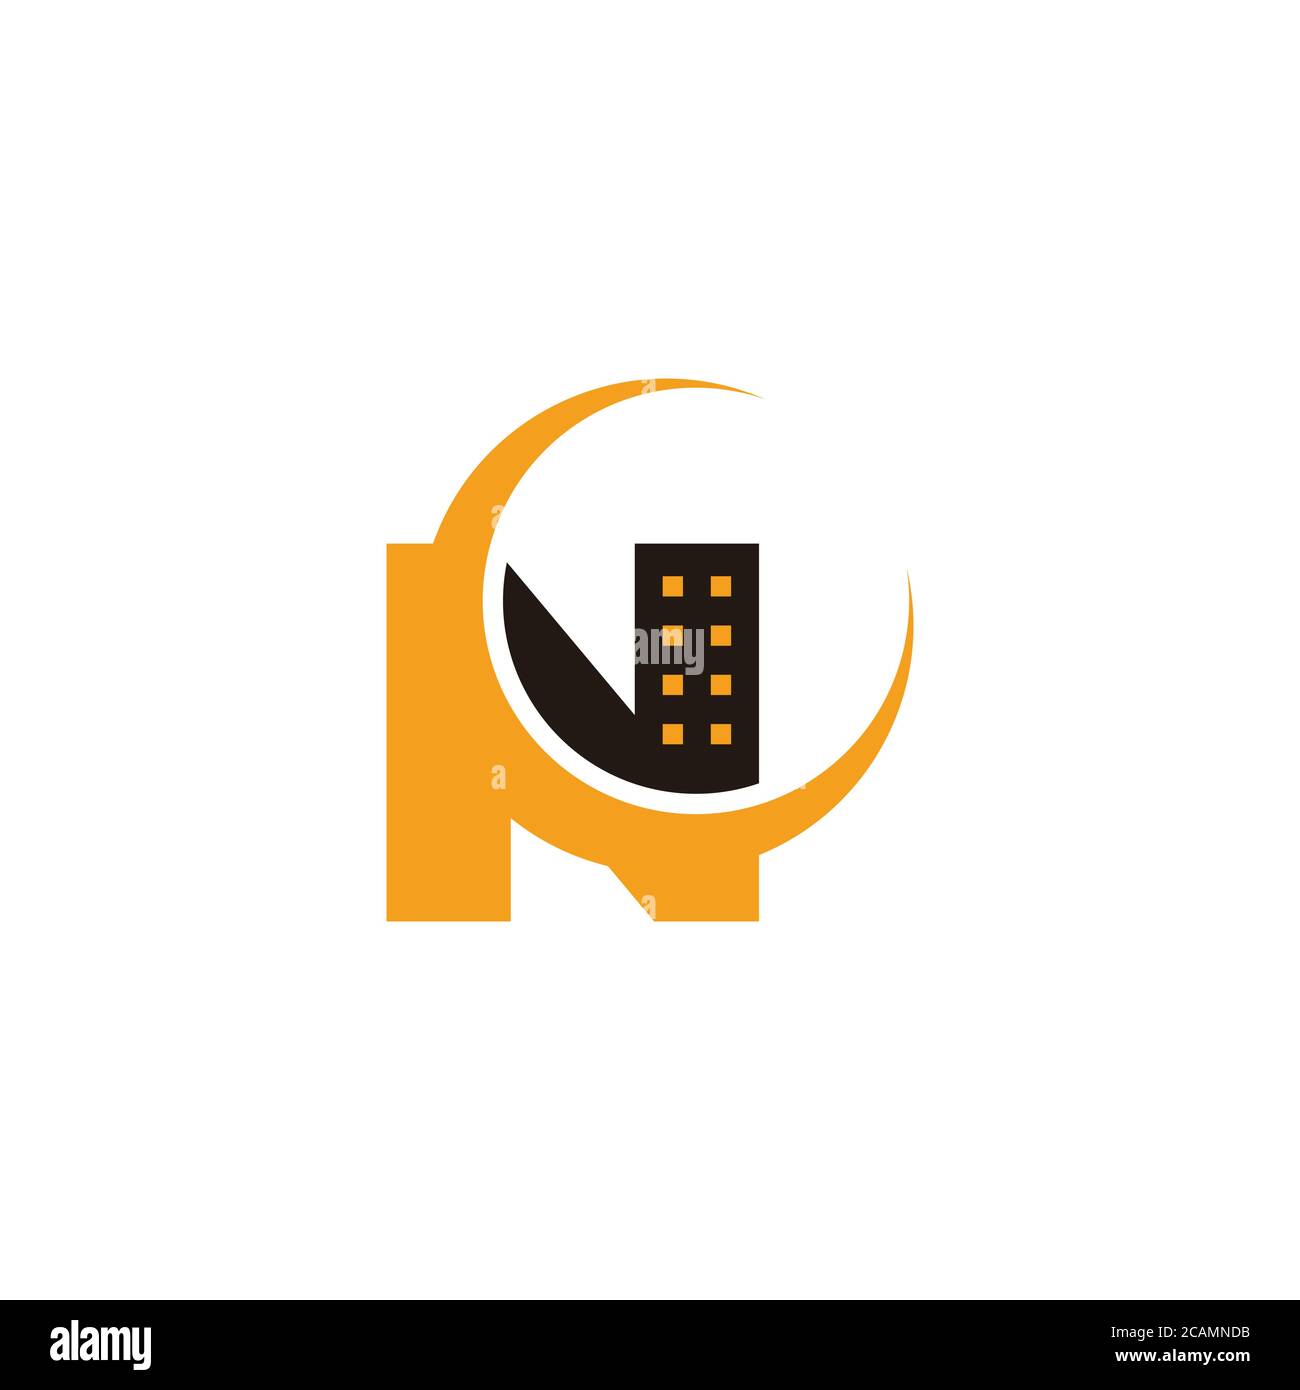 vector of letter nc geometric design fit for night city life symbol Stock Vector